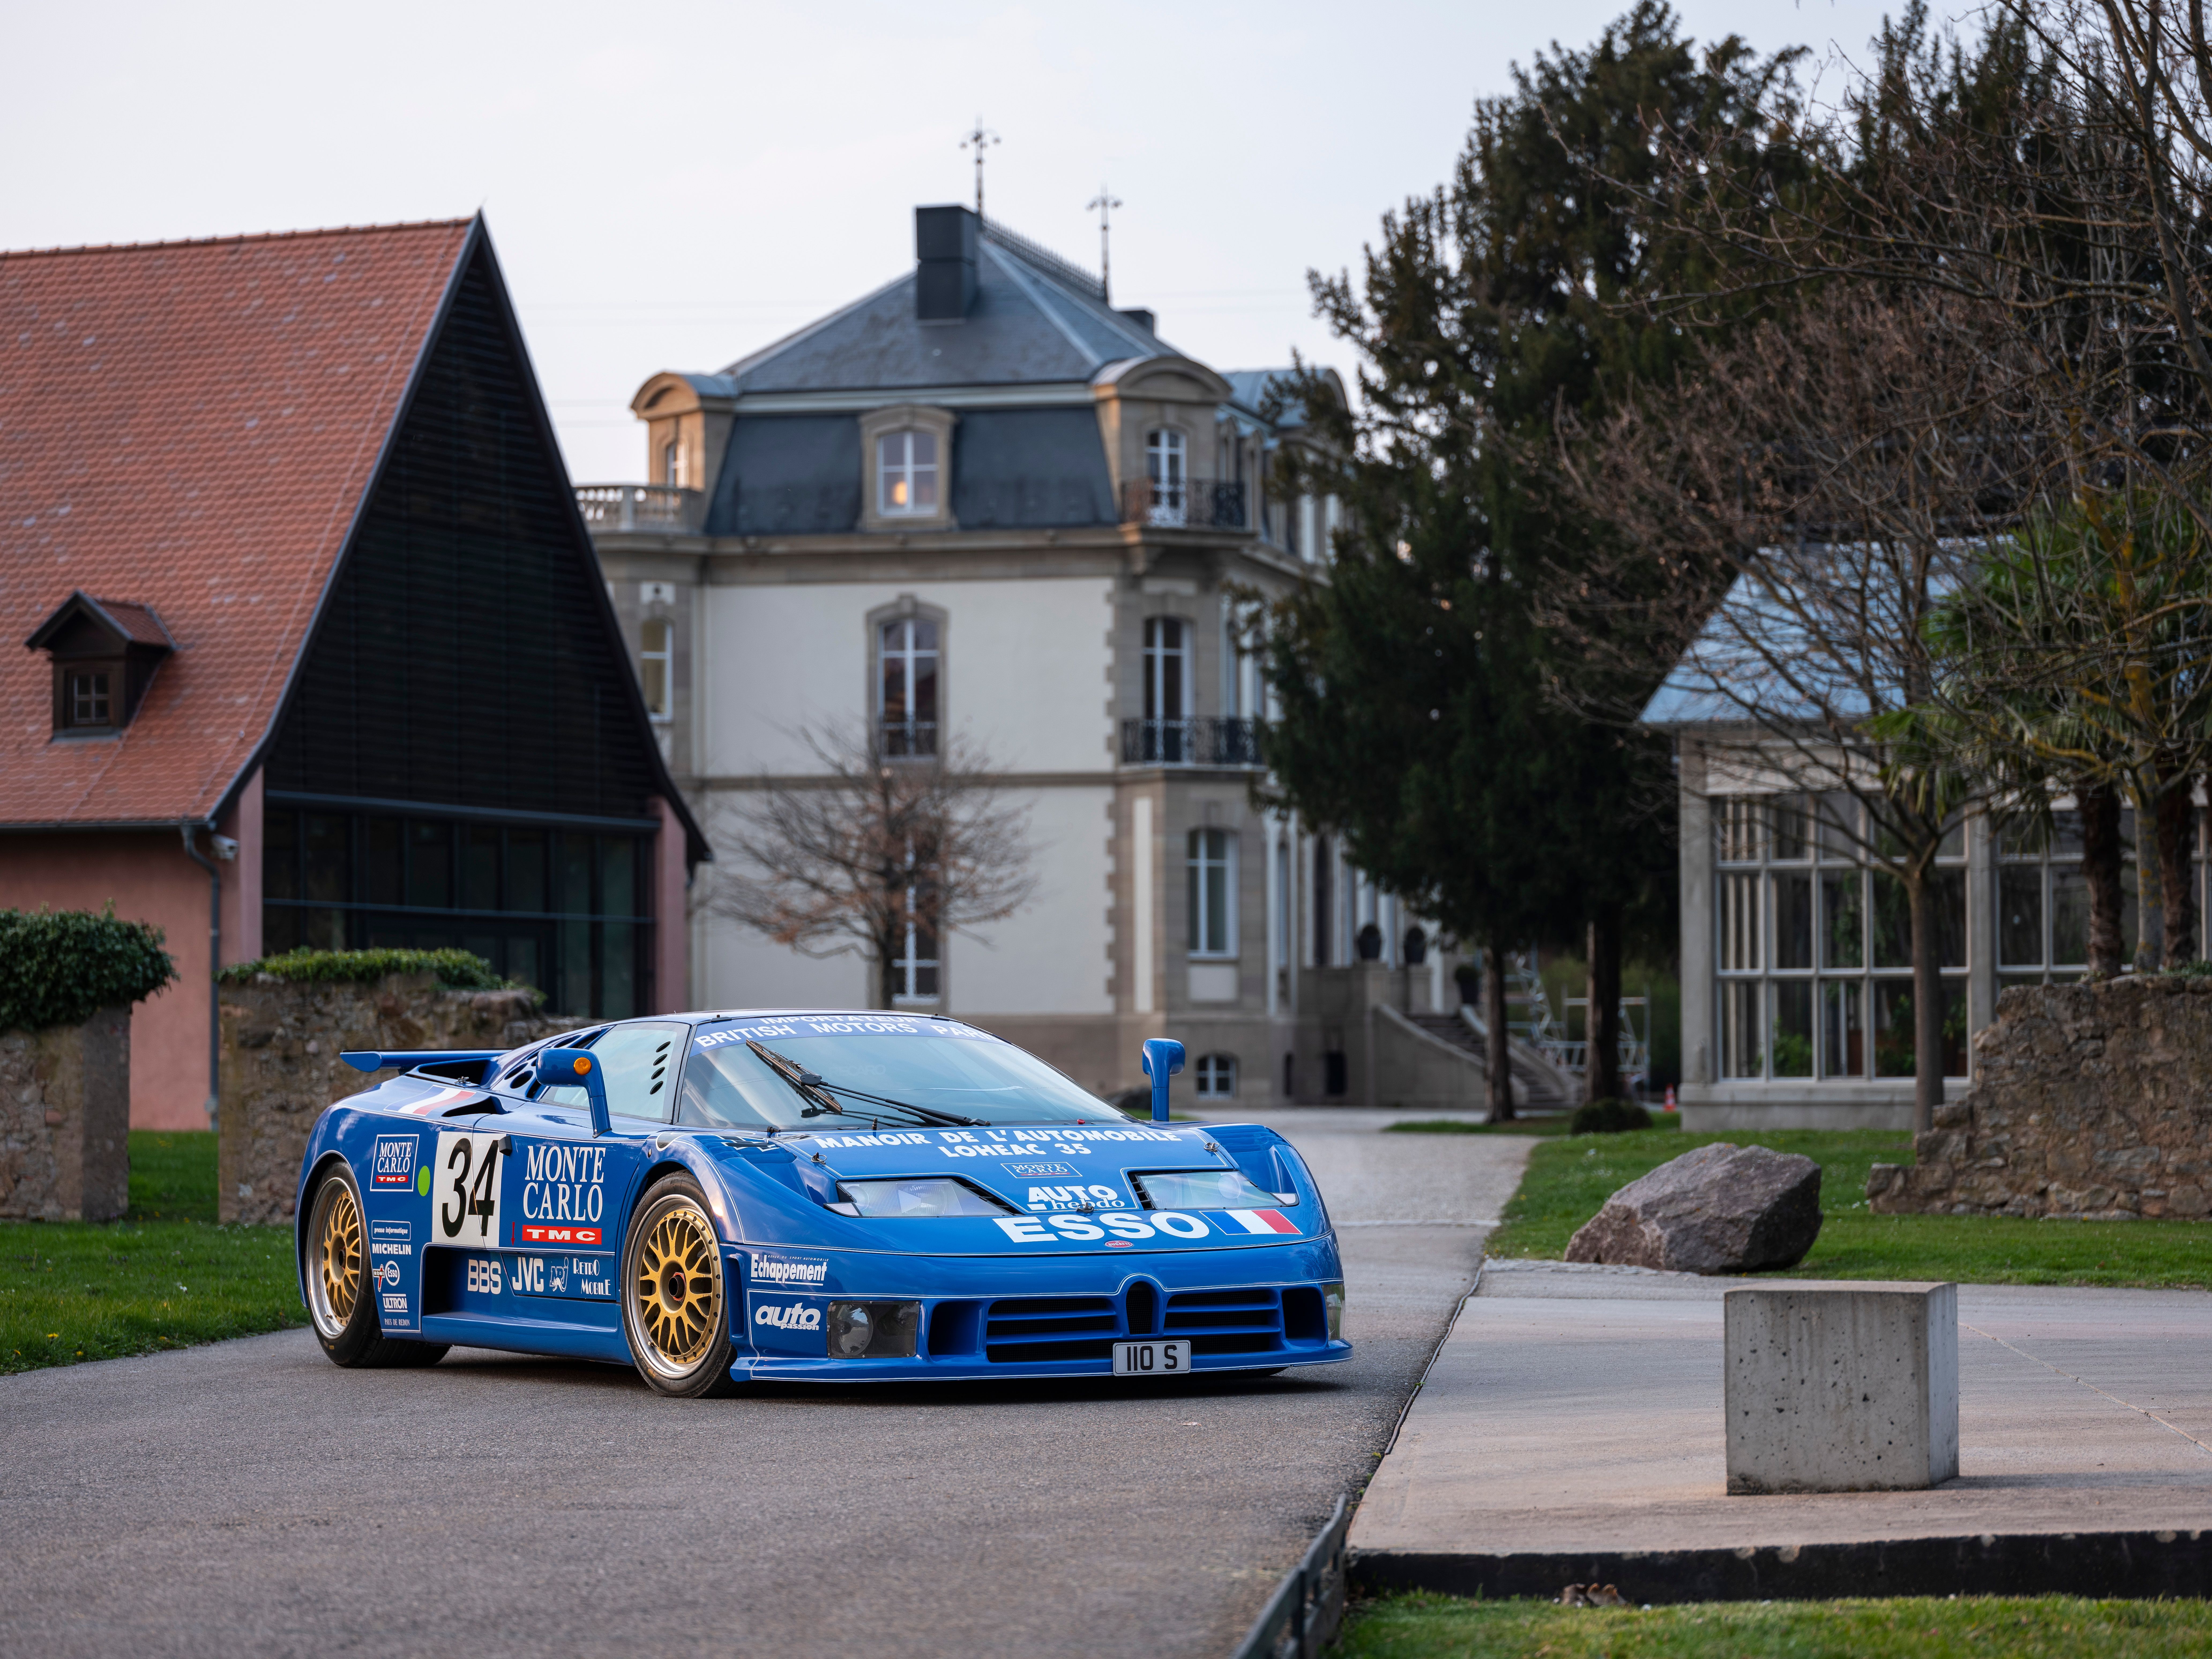 2021 Bugatti EB110 - A Great Car That Didn't Get The Credit It Deserved